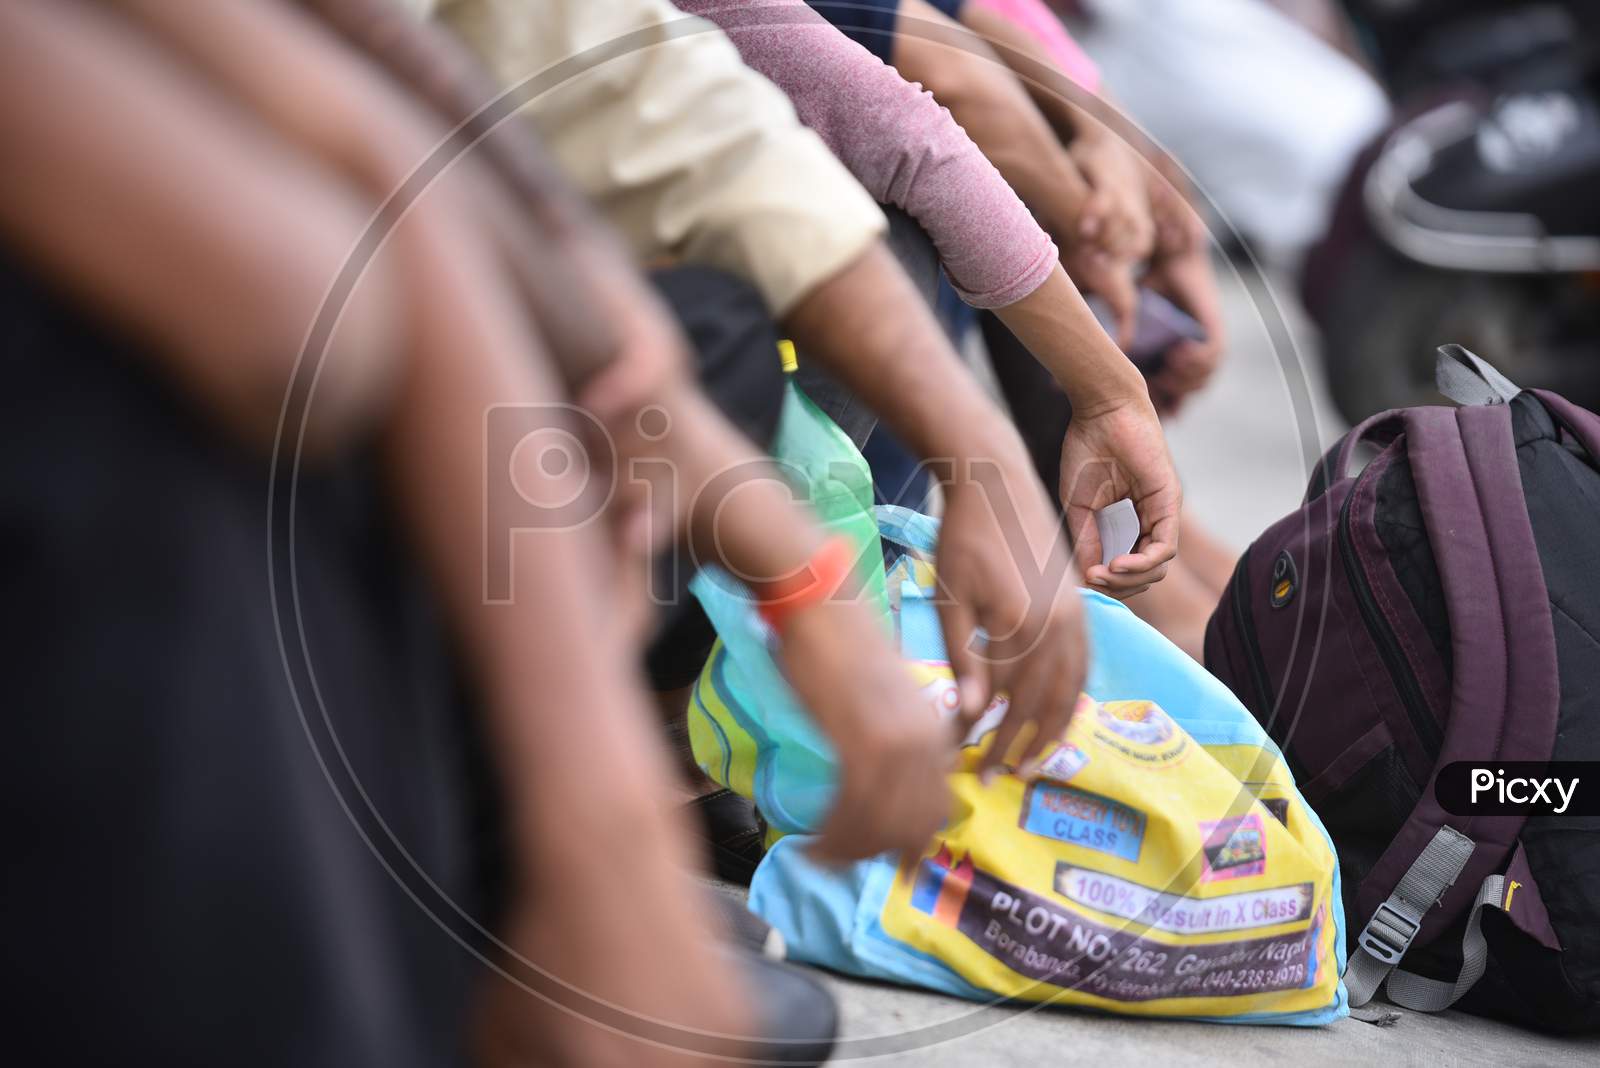 Migrant Workers from UP, Bihar and Jharkhand wait to get their registration done to board a Shramik Special Train in Secunderabad. May 19,2020, Hyderabad.